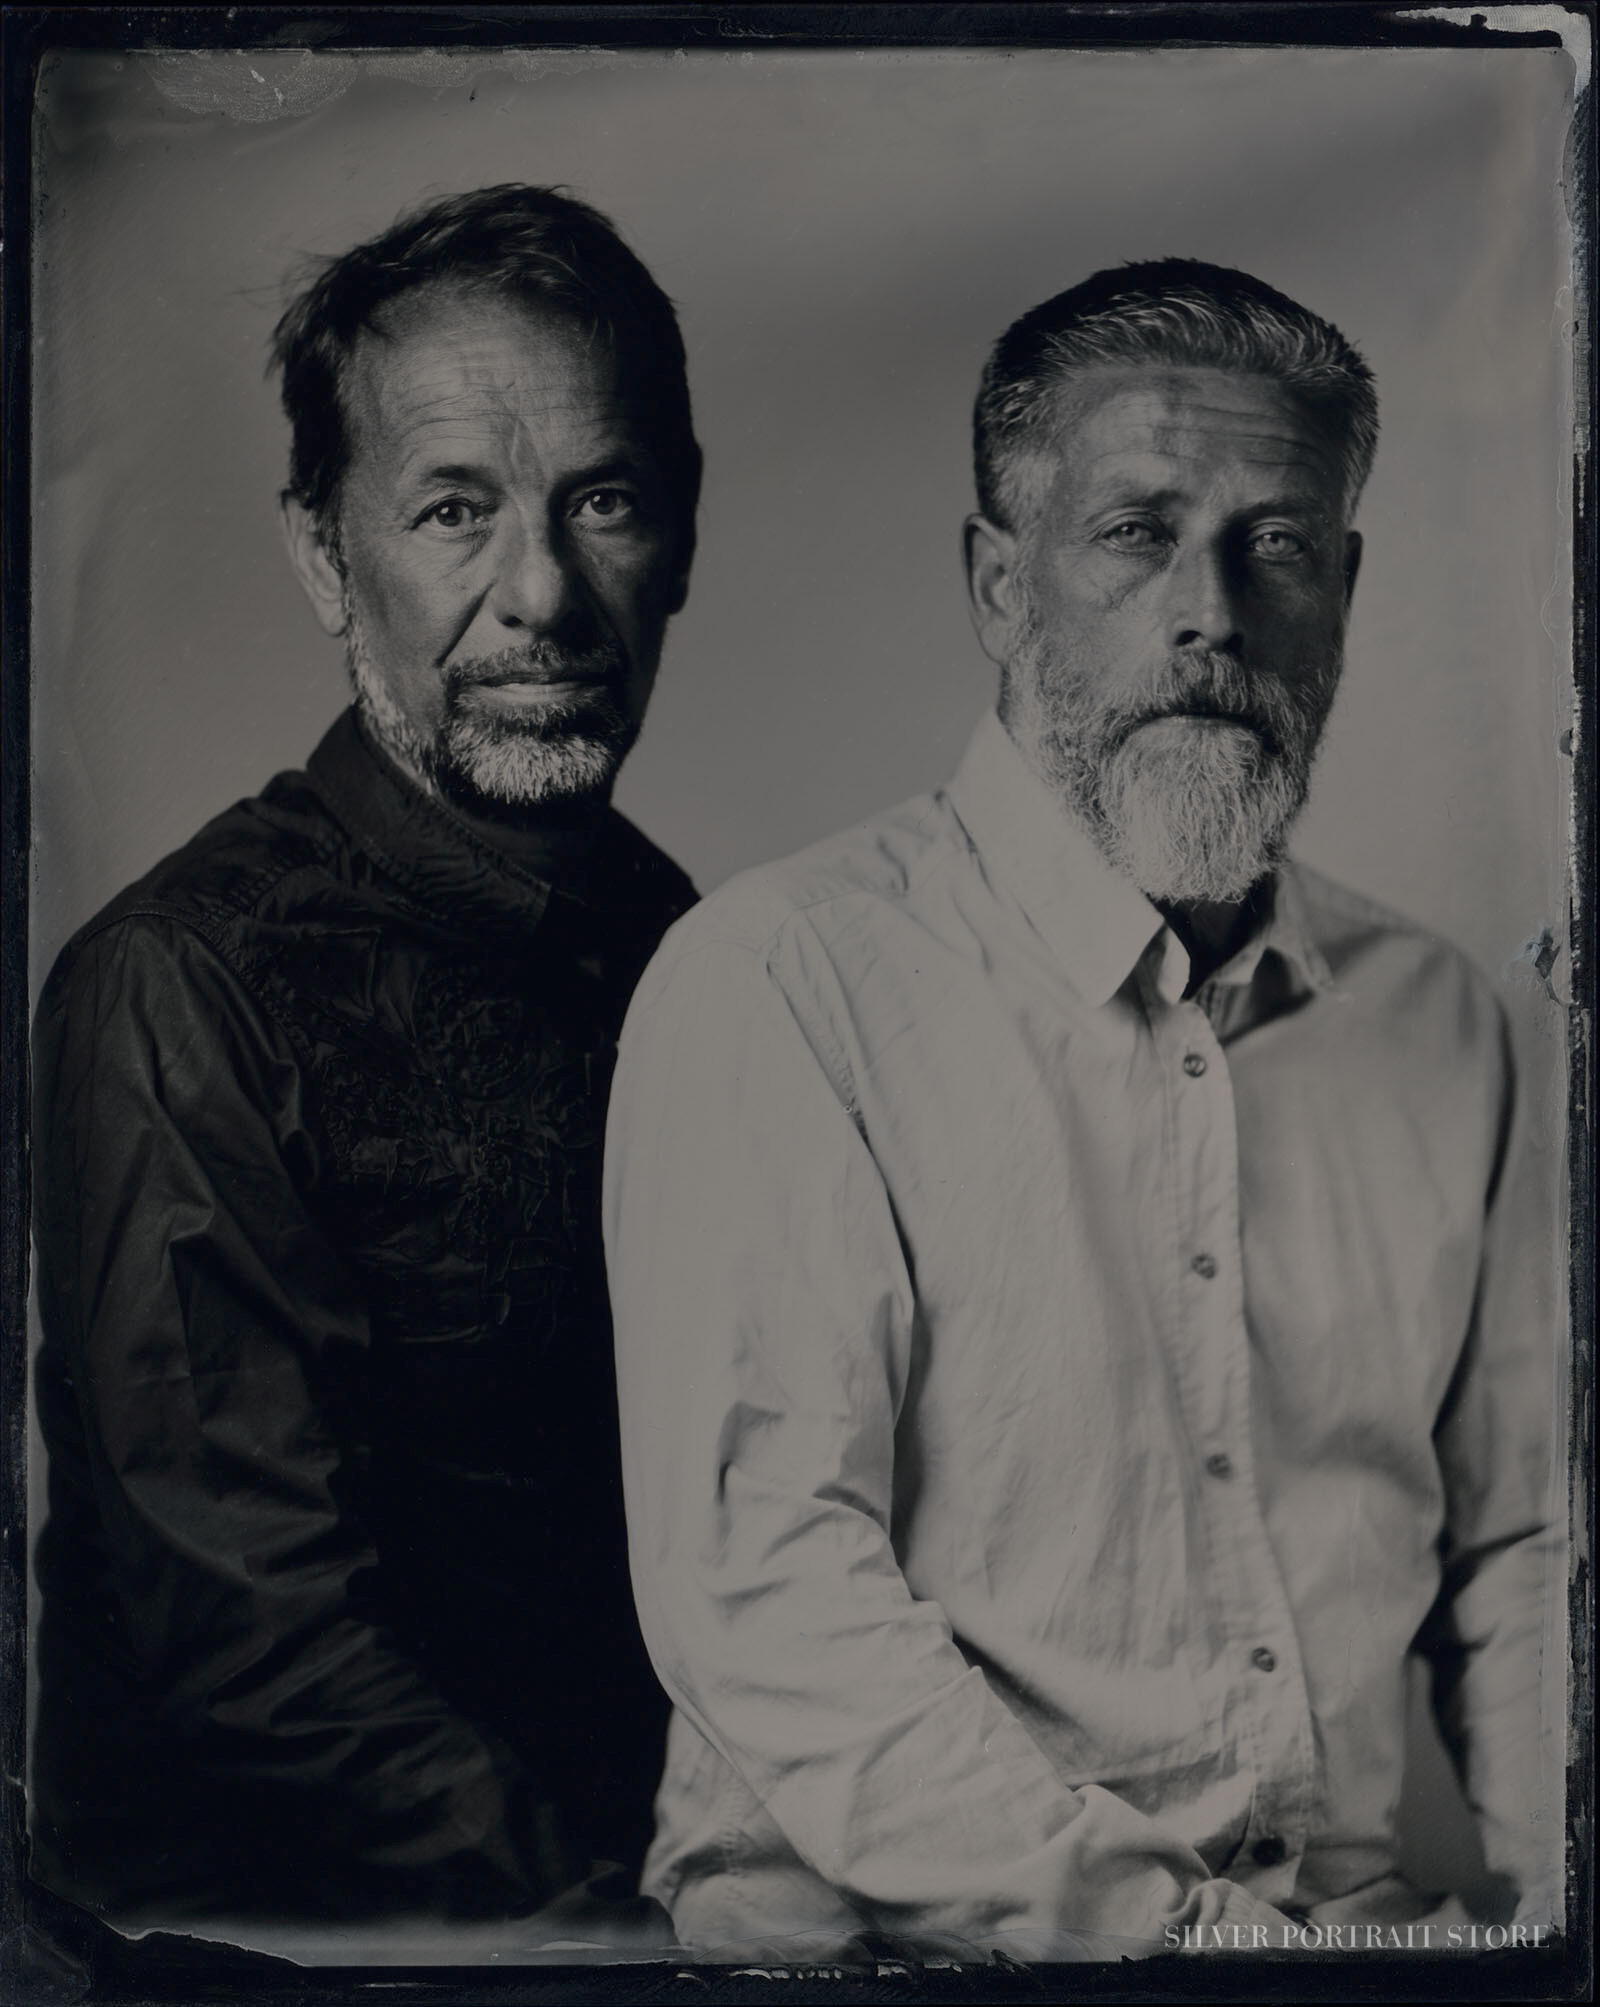 Jan Jelle & Cees-Silver Portrait Store-Scan from Wet plate collodion-Tintype 10 x 12 cm.